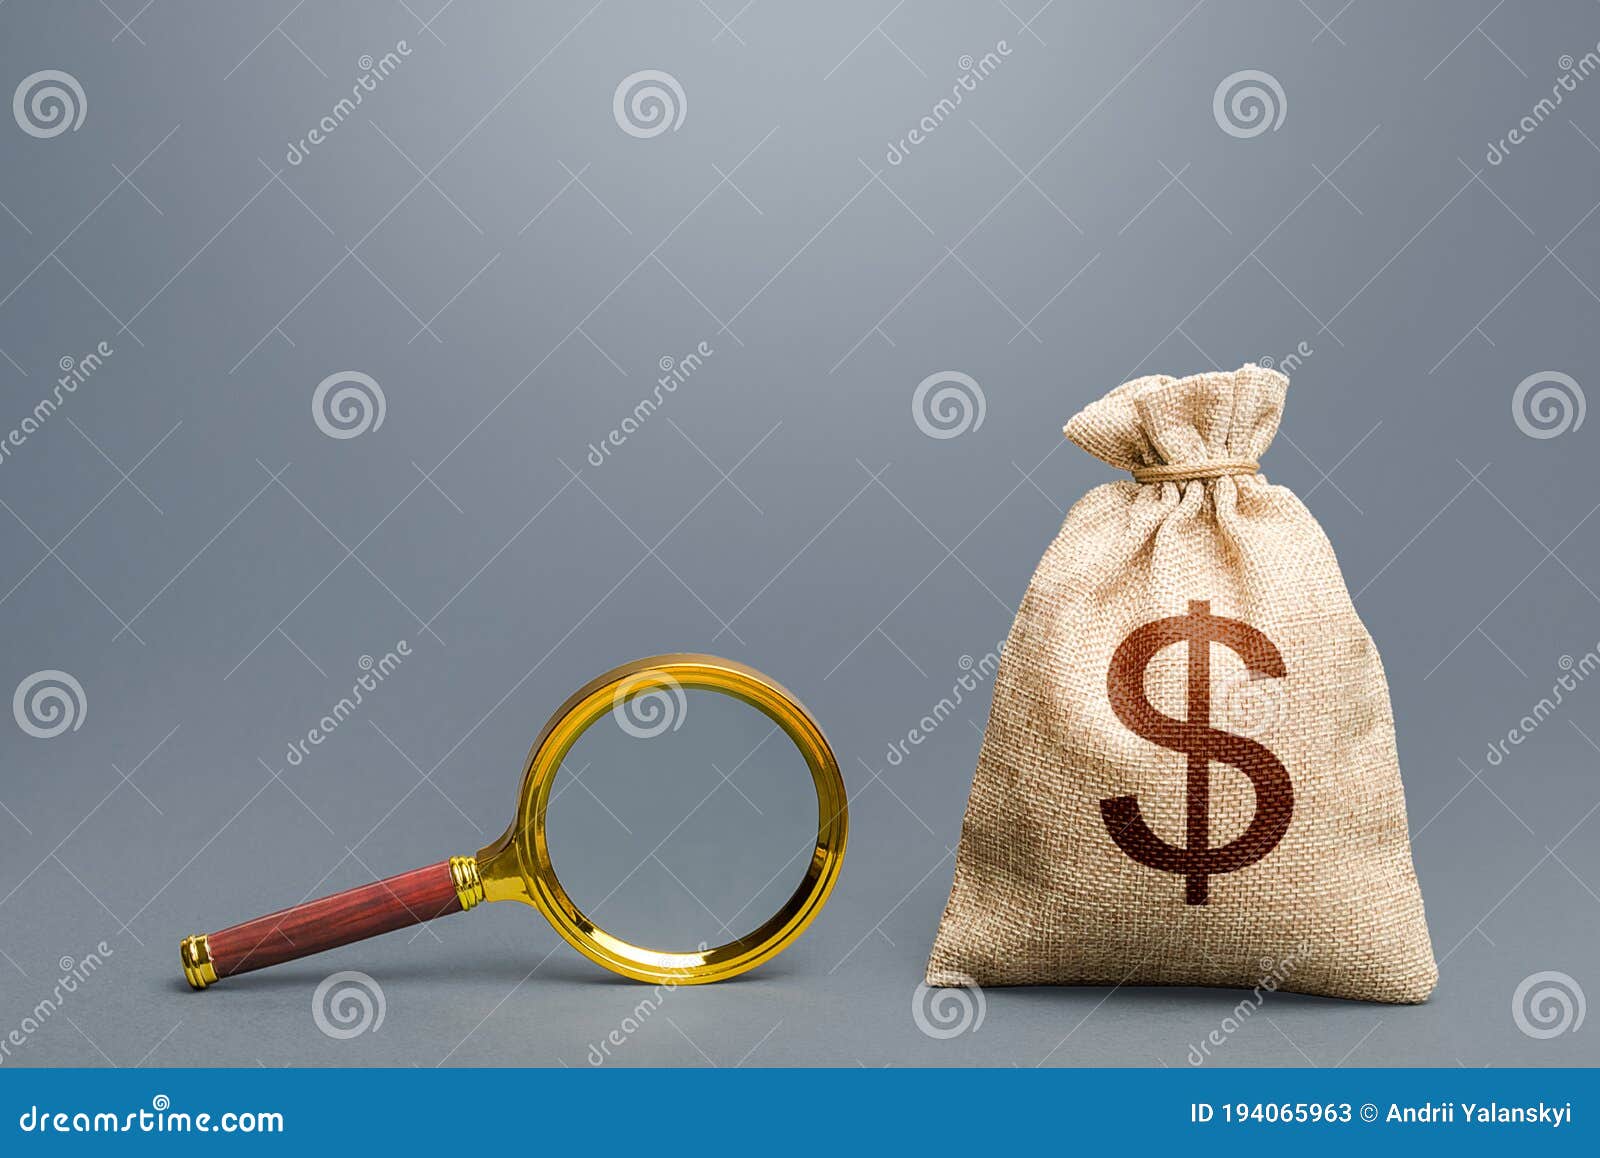 dollar money bag and magnifying glass. financial audit. origin of capital and legality of funds. search and attraction